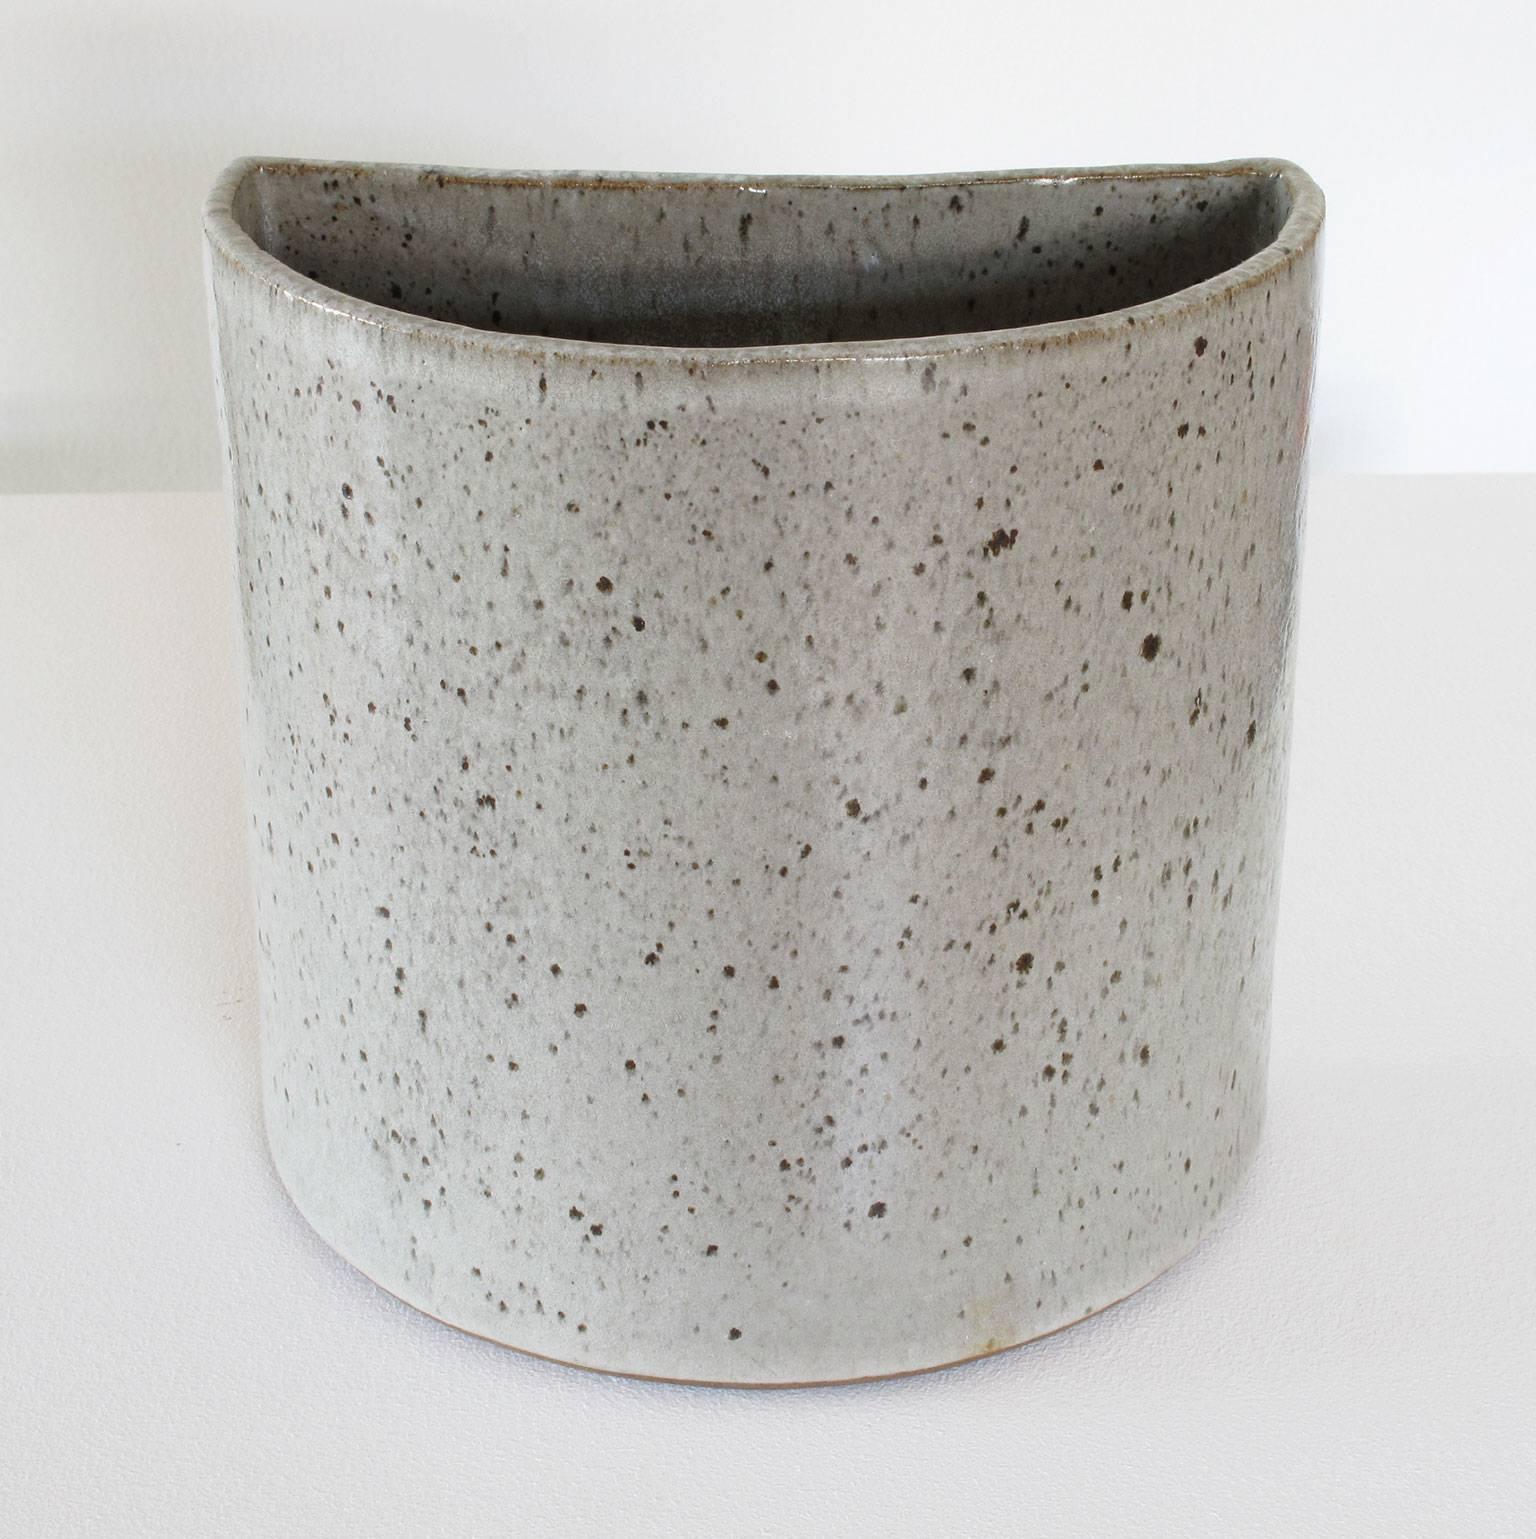 David Cressey 'wall pocket' ceramic planter with flat back to be mounted flush onto wall, stoneware, glazed grey, 1960s, Pro Artisan collection, architectural pottery, Los Angeles, California. Measures: 8 high x 8 wide x 5 deep inches, in excellent